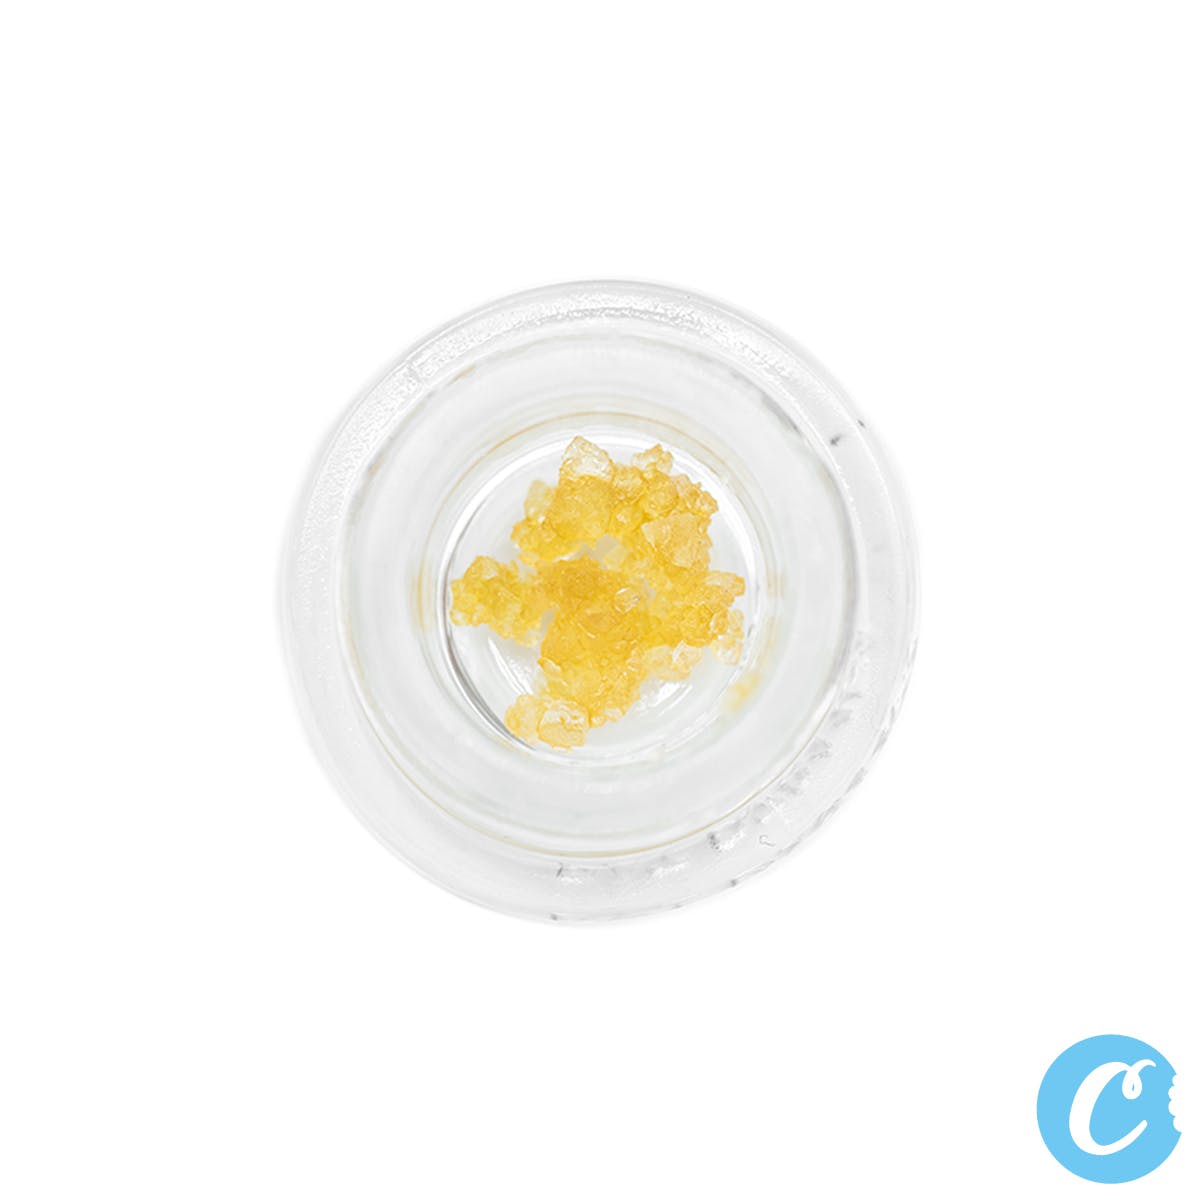 MOXIE - Golden State Banana Live Resin THC-A